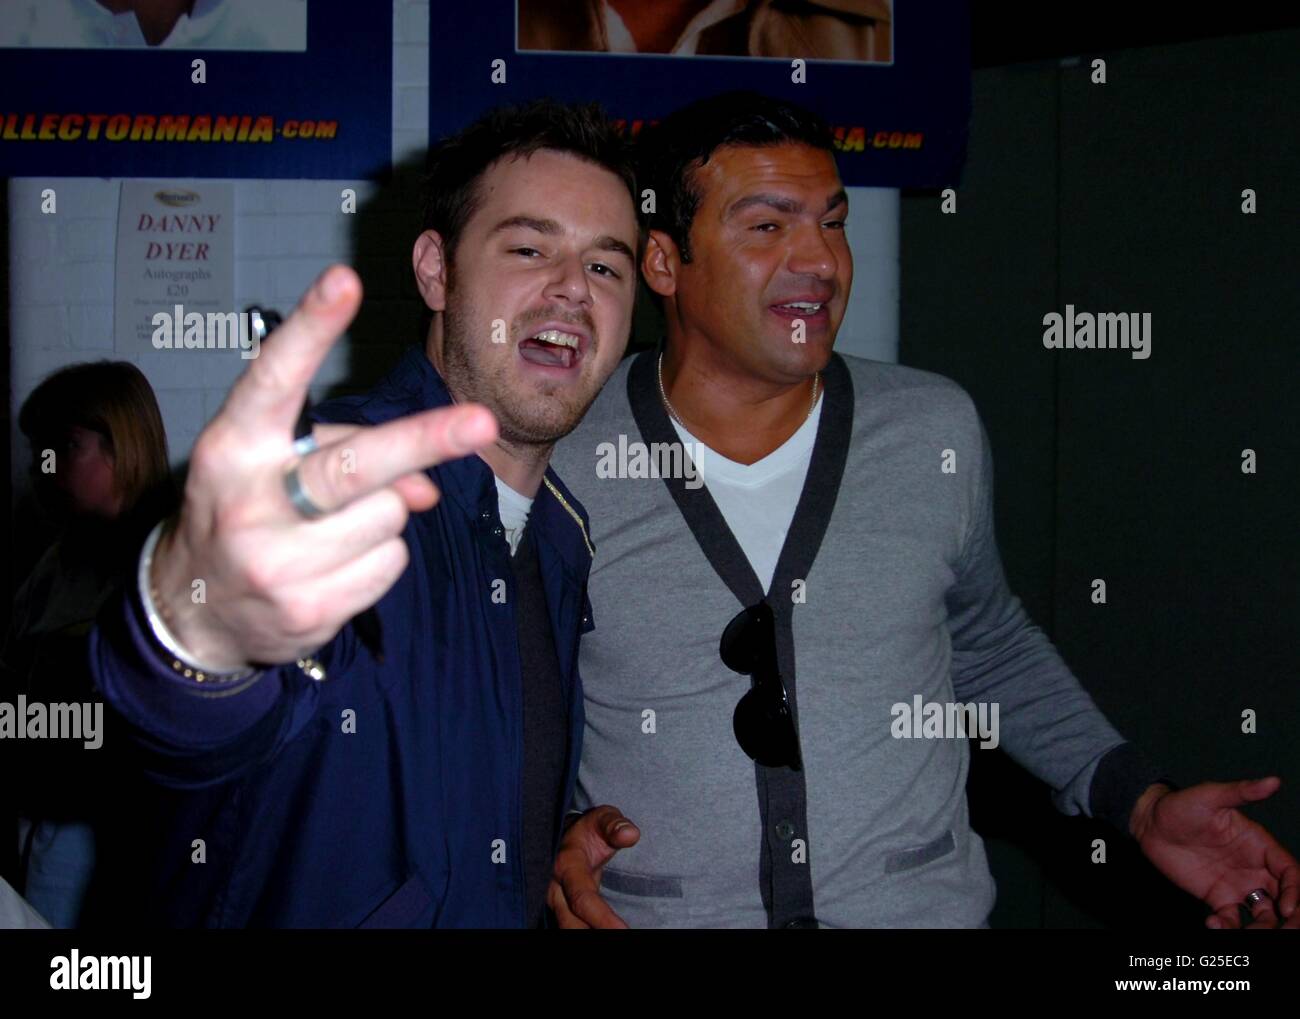 DANNY DYER AND TAMER HASSAN at  london film and comic con at earls court london 22/07/2008 Picture By: Brian Jordan / Retna Pictures  Job:  Ref: BJN    -  *World Rights* Stock Photo